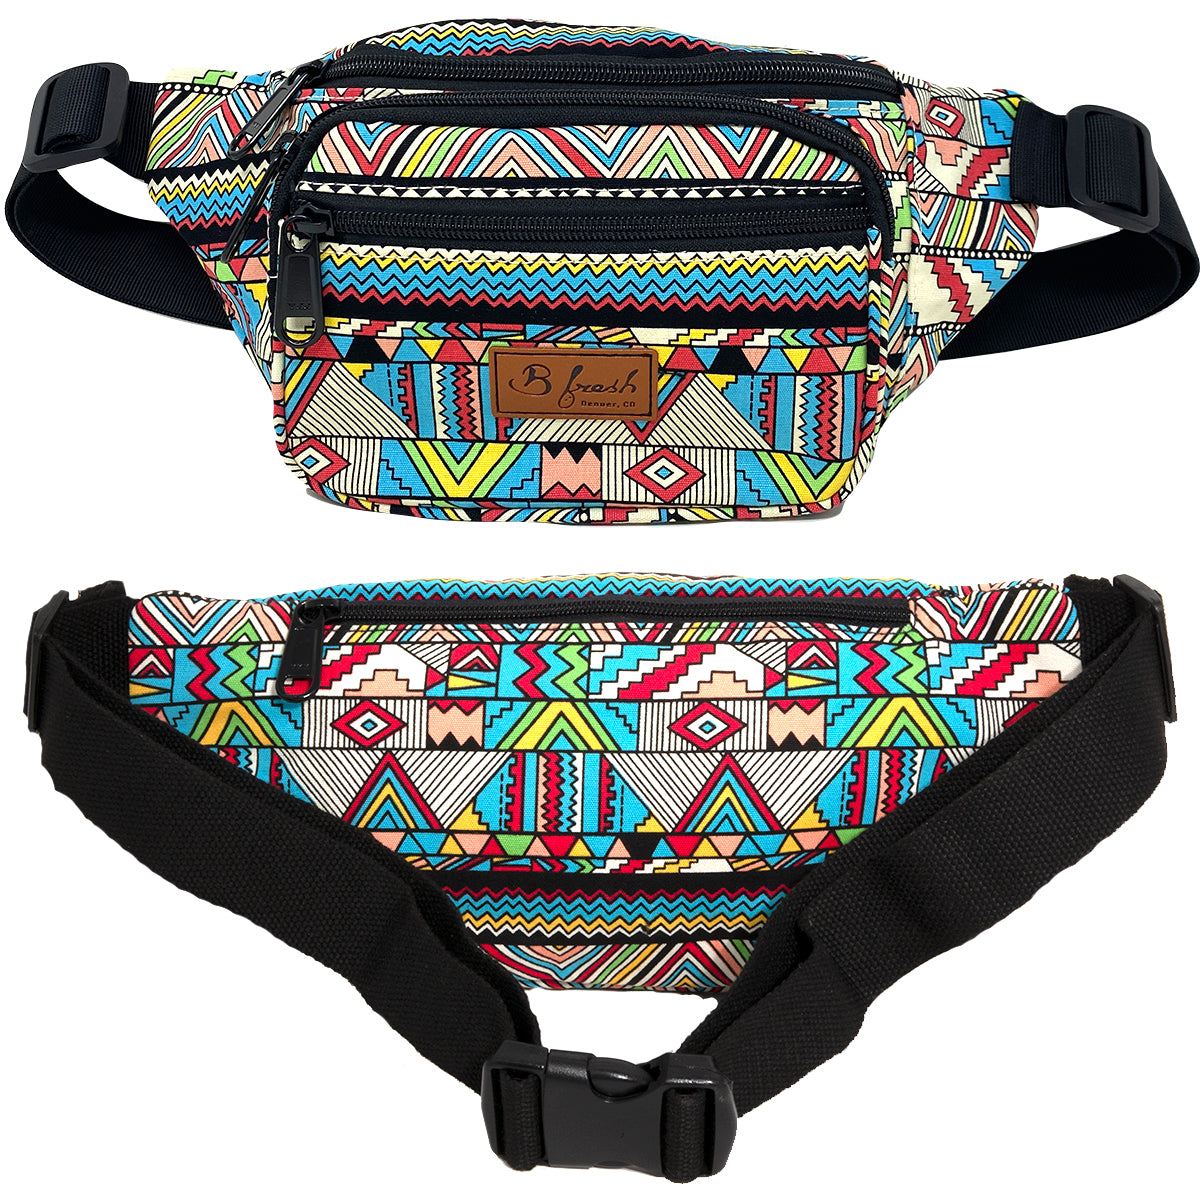 Colored Pencils Retro Aztec Style Fanny Pack - Southwestern tribal old school throwback yellow blue red black bum bag fanny pack. - B Fresh Gear